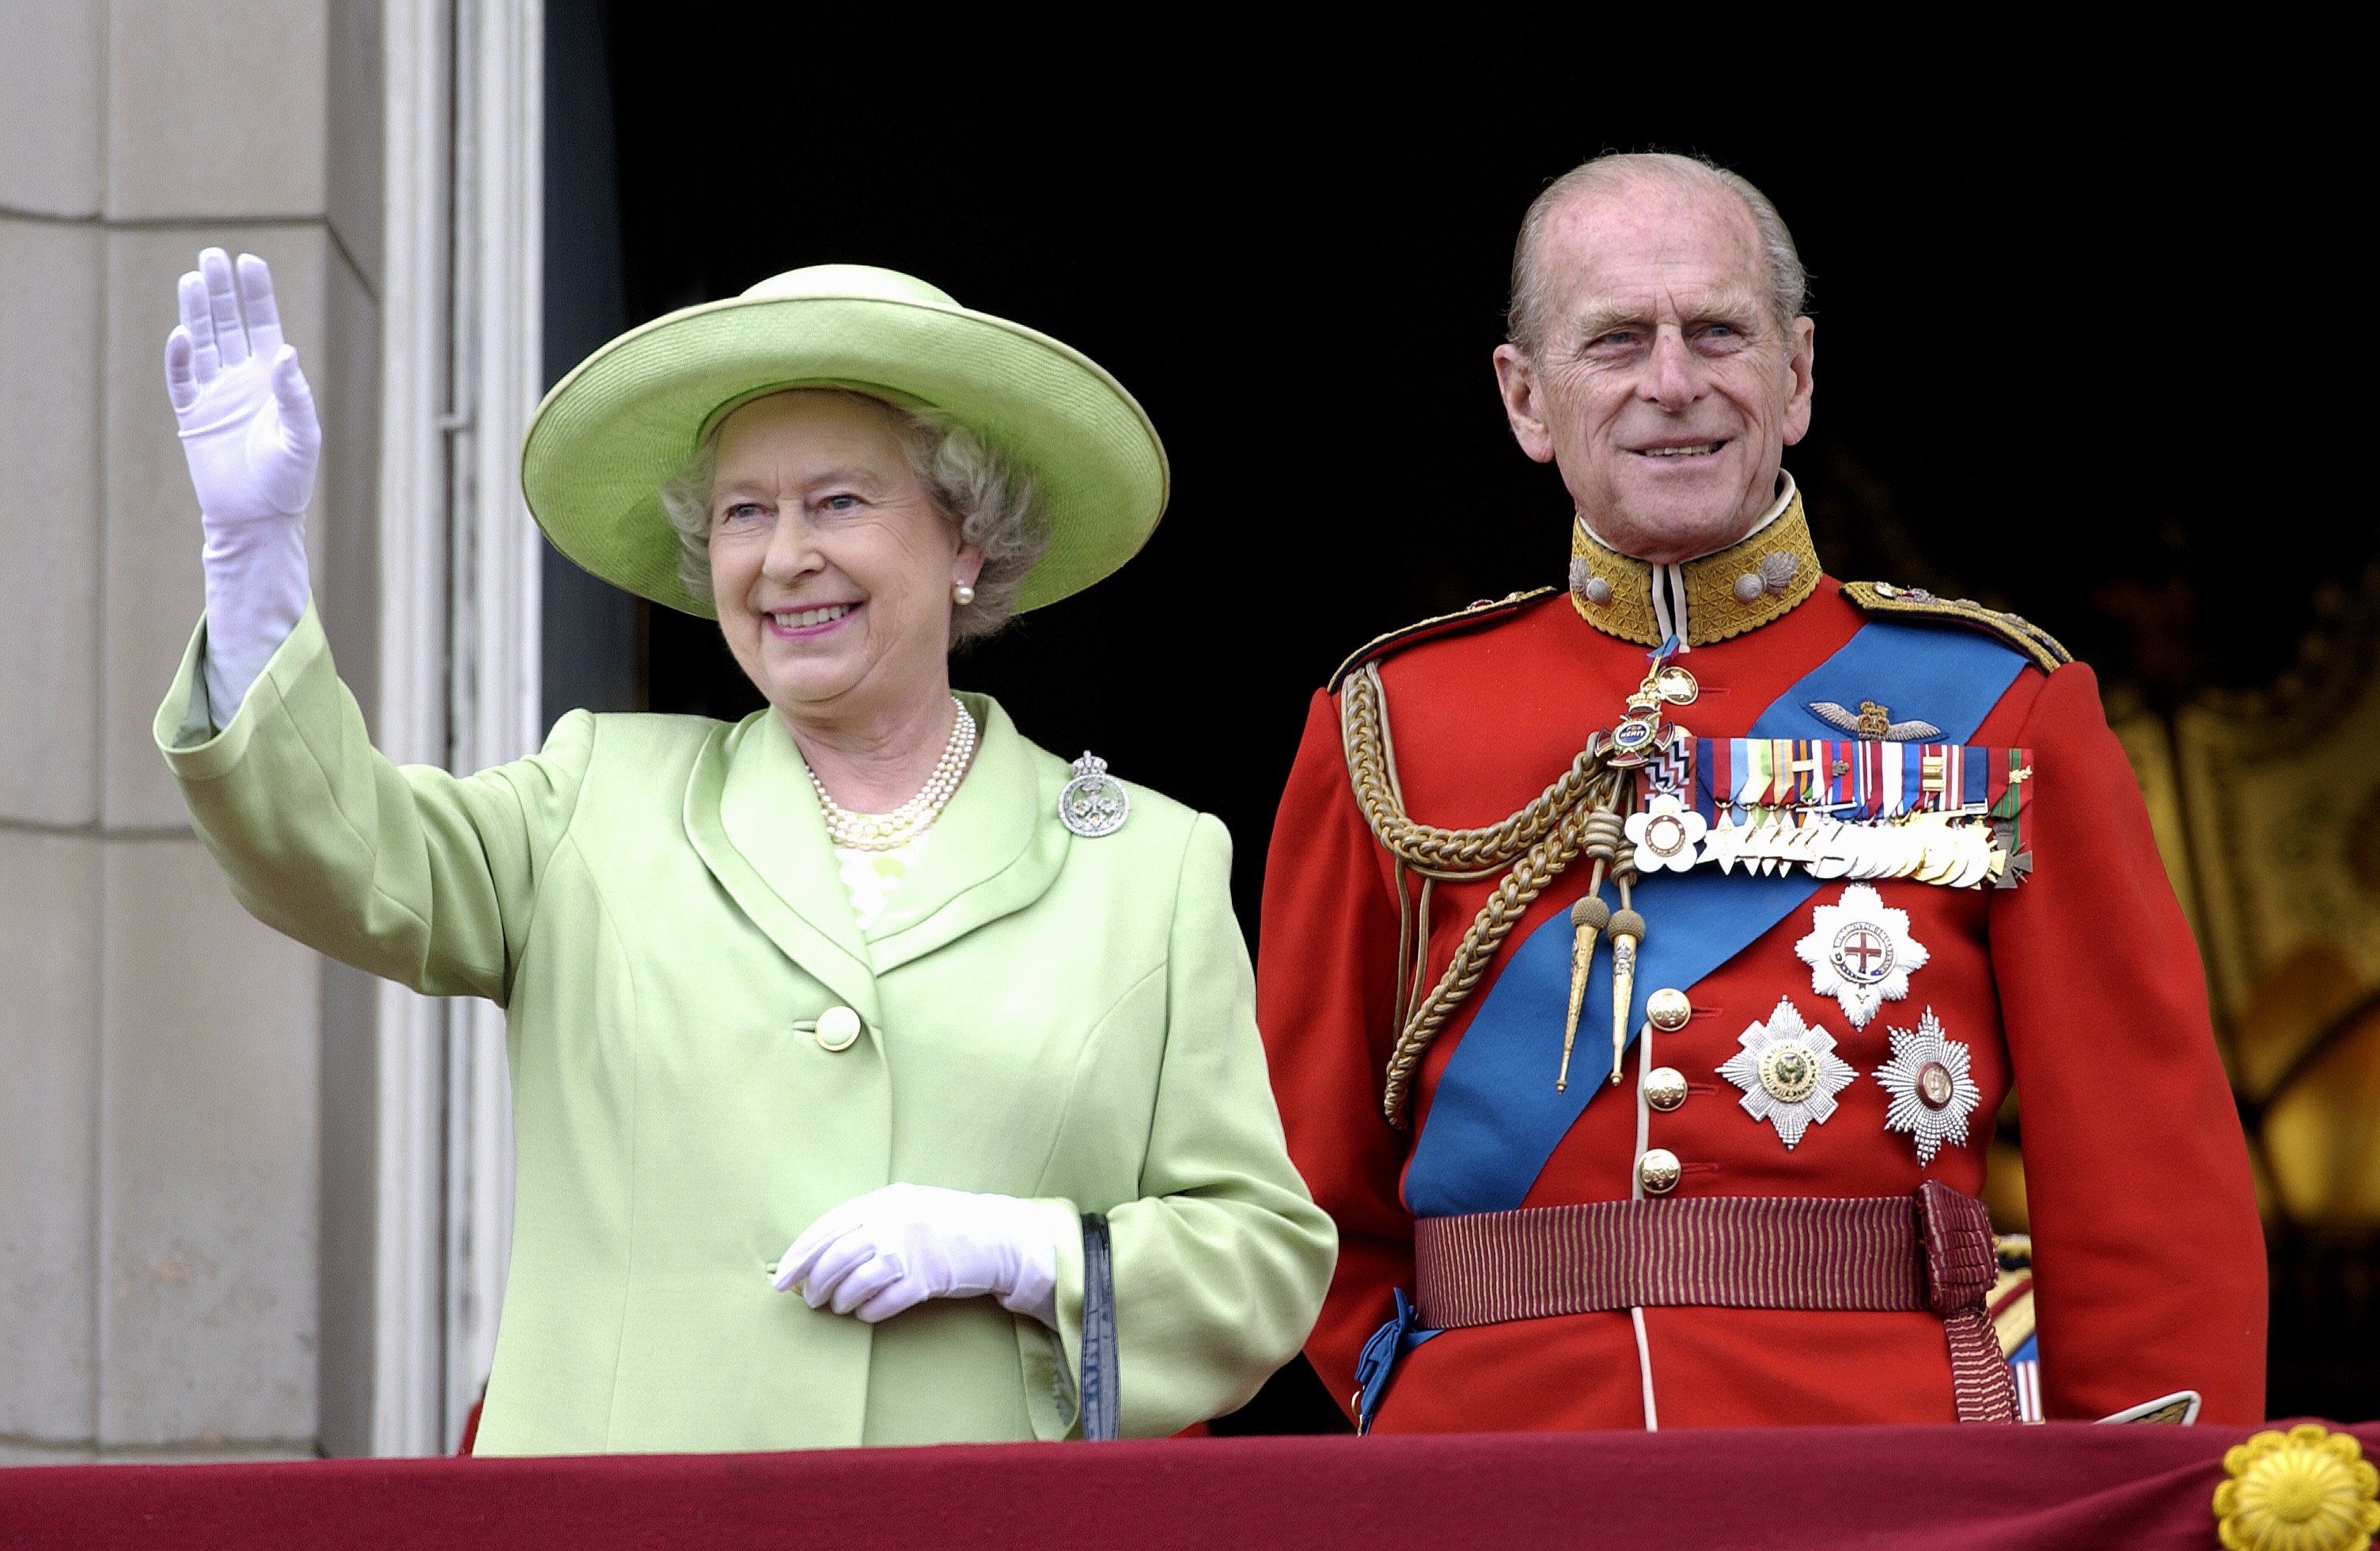 Queen Elizabeth II and Prince Philip on the balcony of Buckingham palace from Troop the Colour 2001. London, England. | Photo: Getty Images